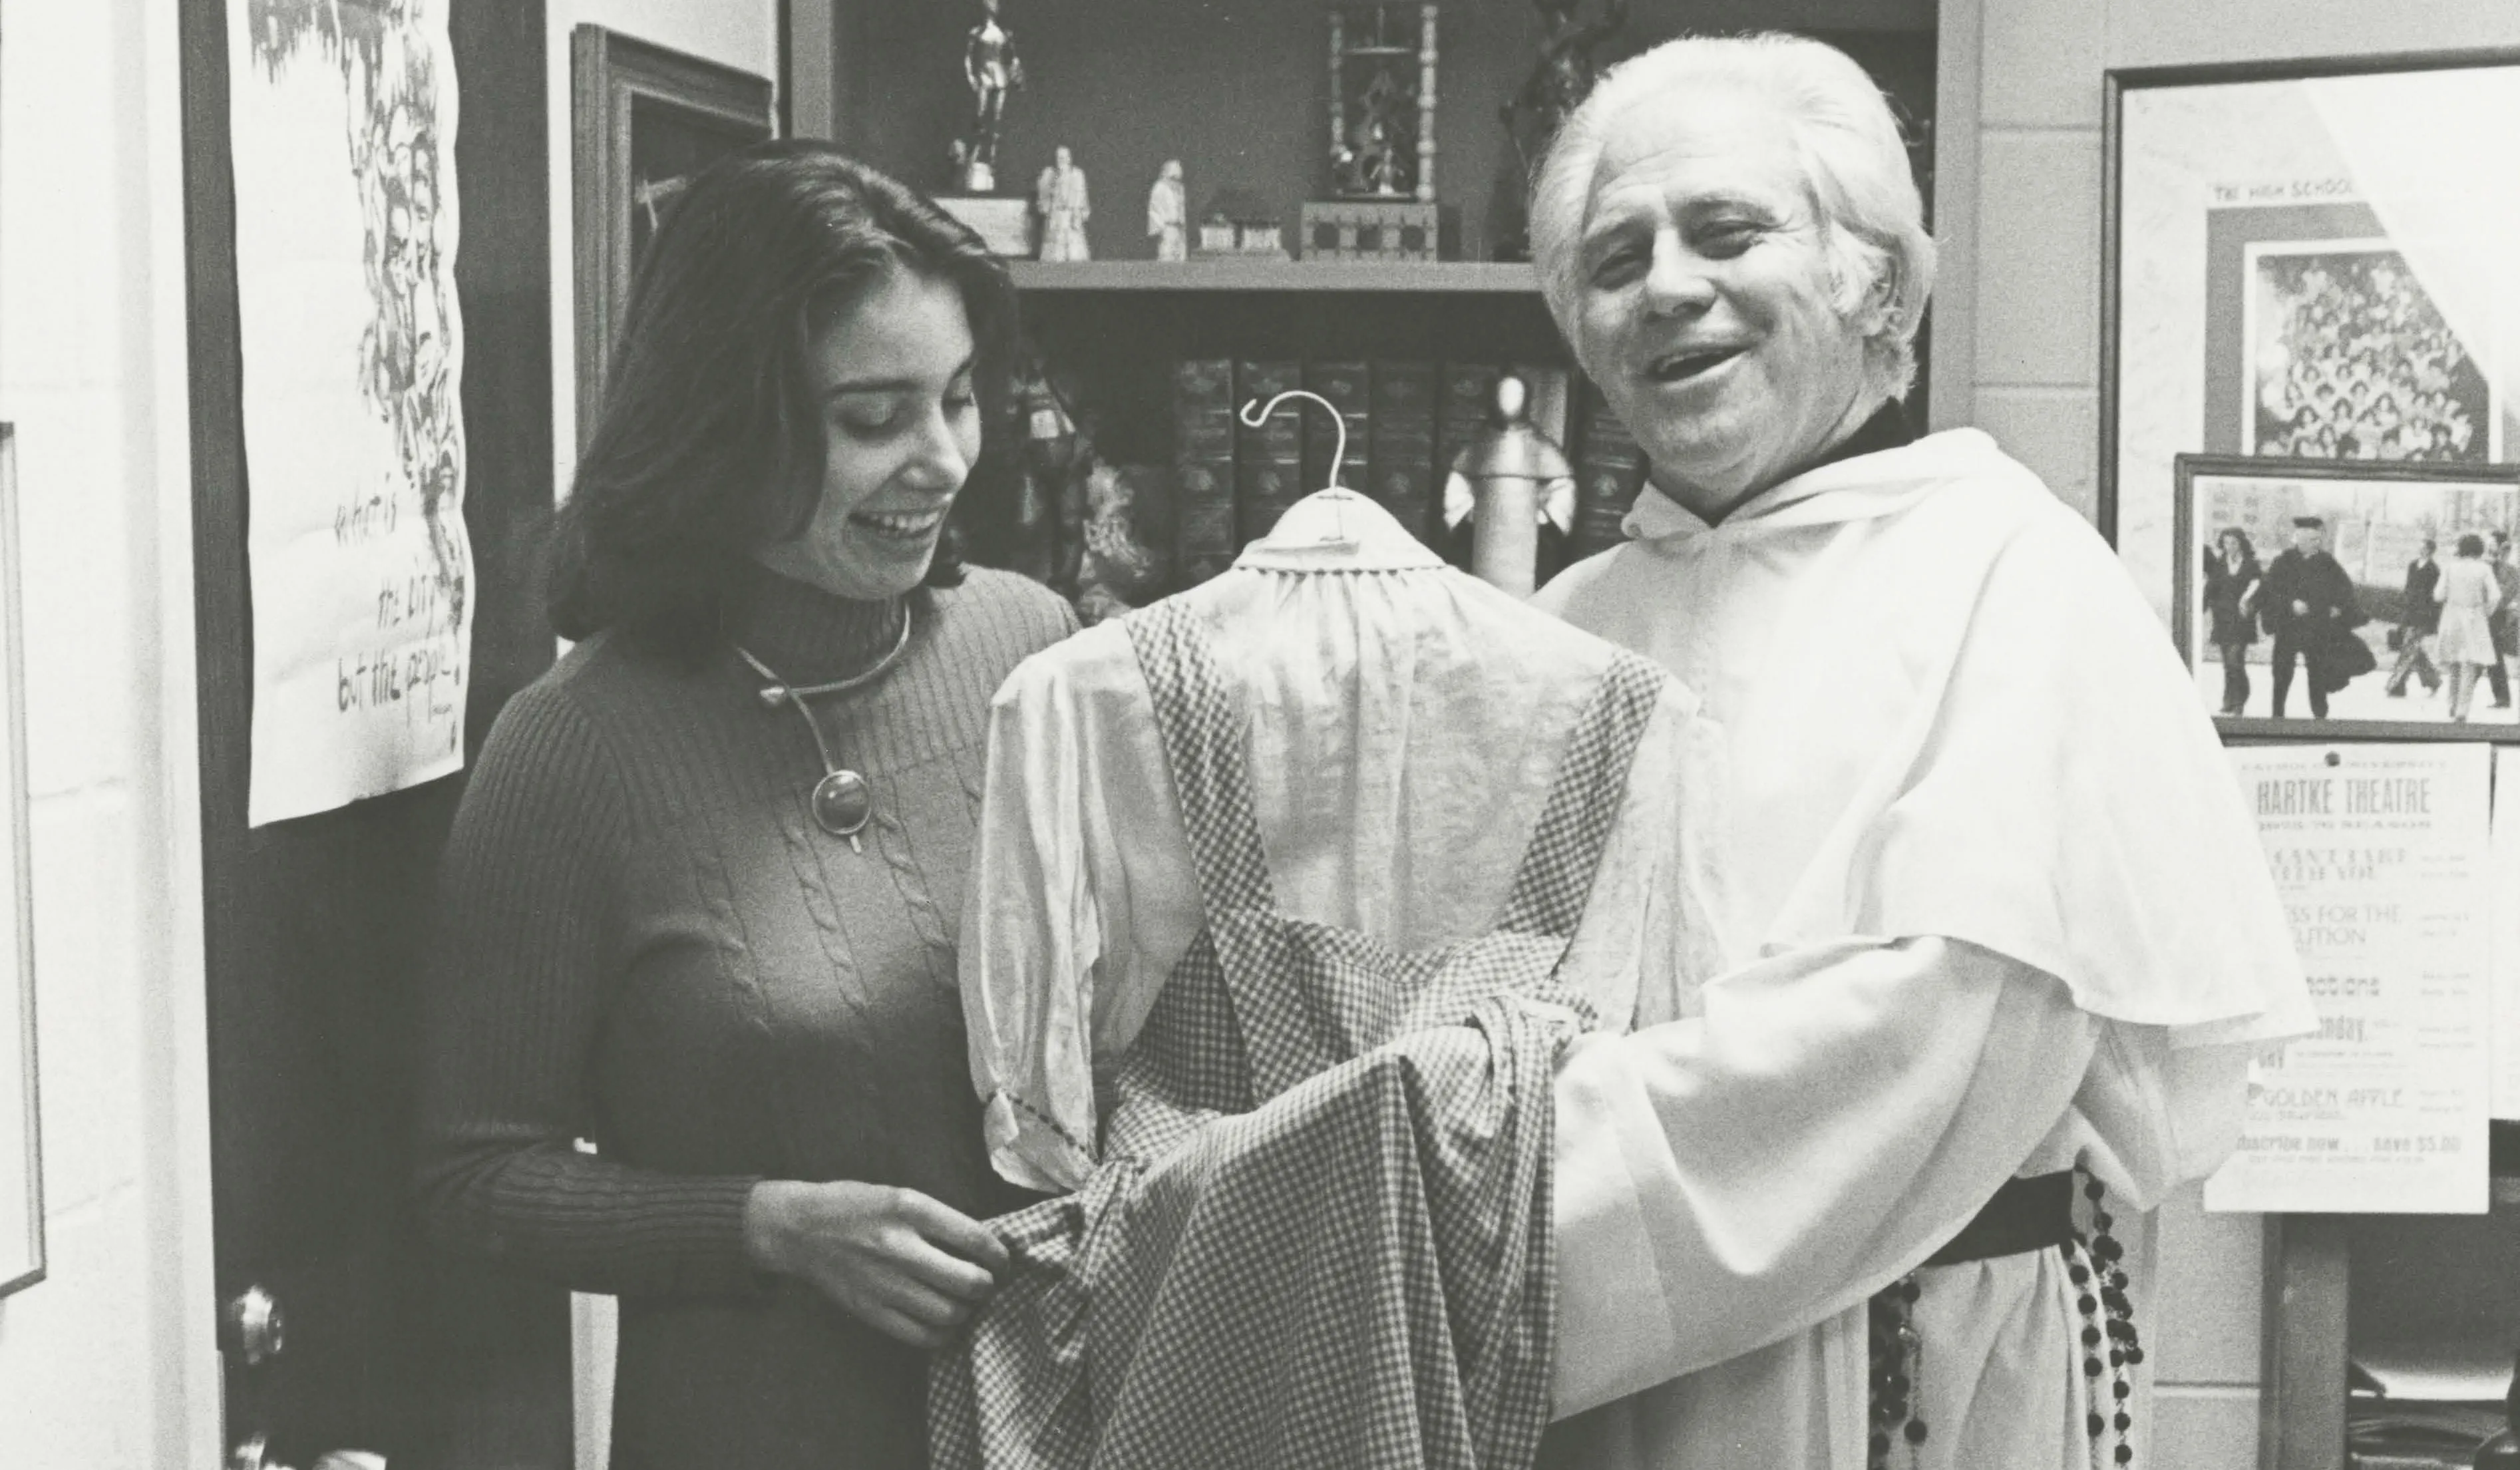 Fr. Gilbert Hartke holds a dress gifted to him that Judy Garland wore as Dorothy Gale in the 1939 film ‘The Wizard of Oz’. Courtesy of The Catholic University of America.